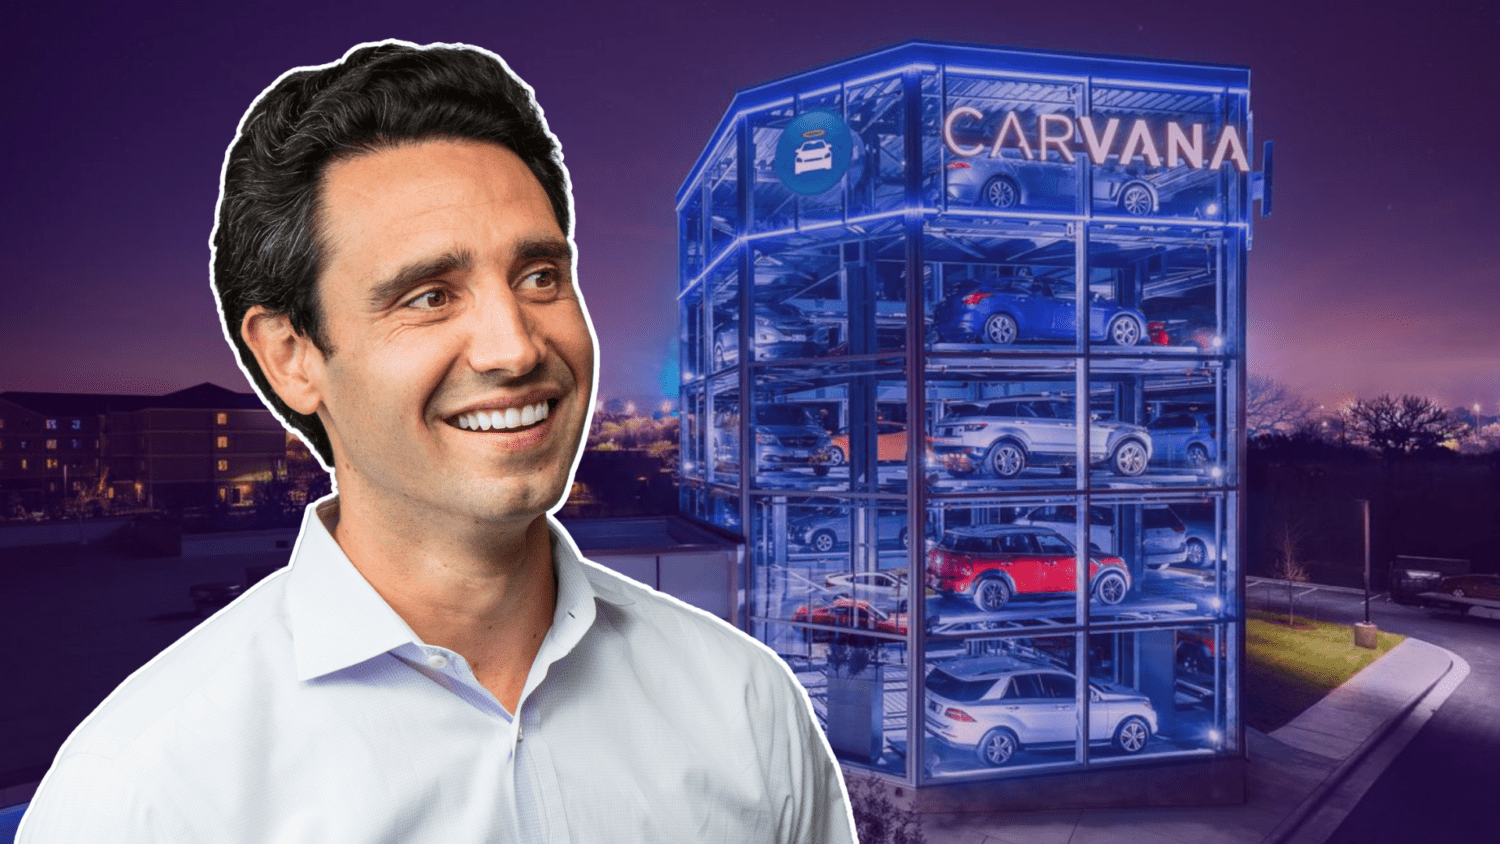 Carvana revealed its plans to raise capital and restructure operations by selling up to $1 billion in shares. 